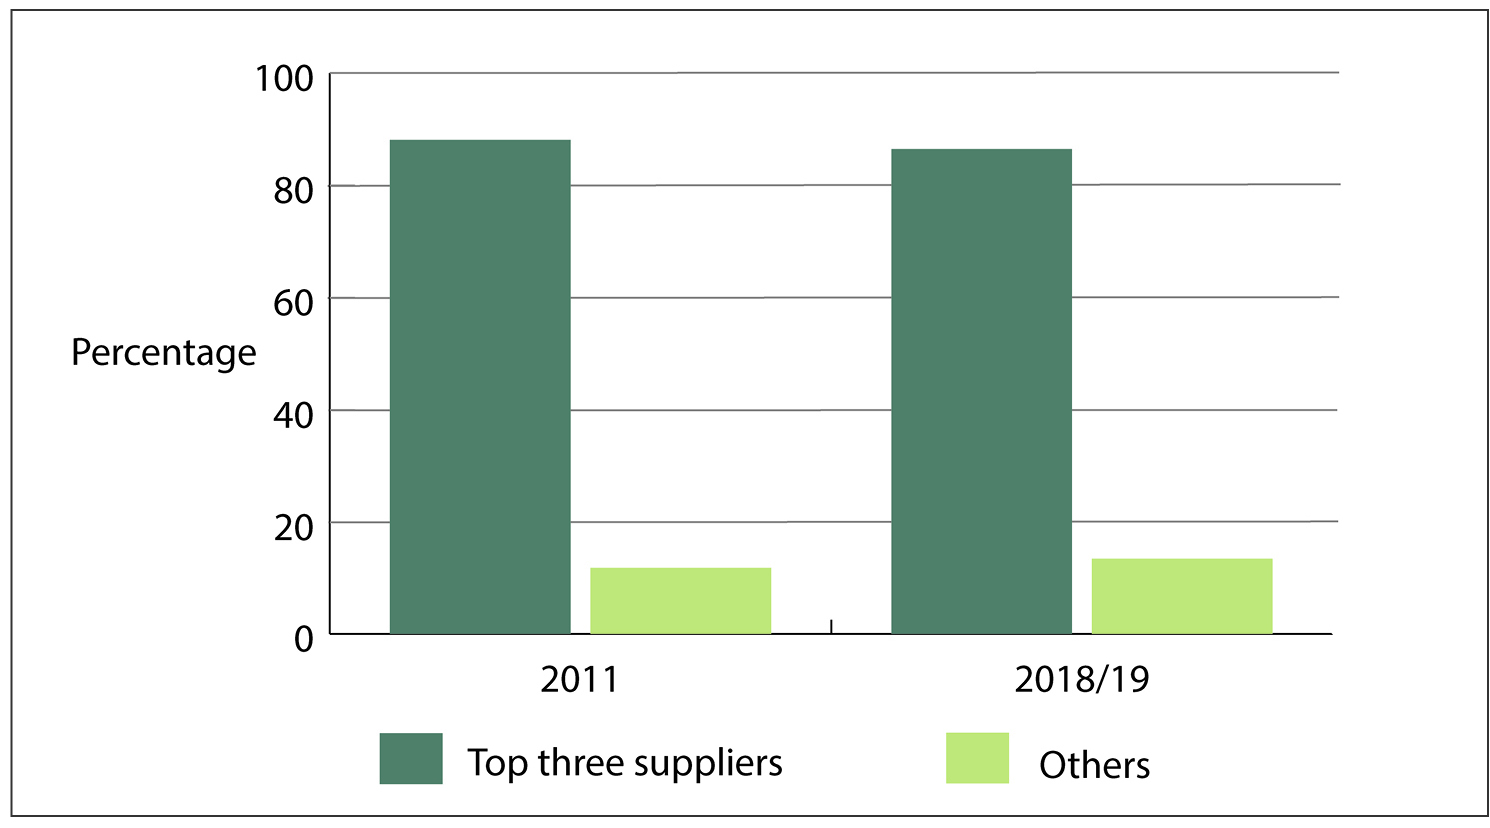 Figure 13 - Market share of the top three suppliers in 2011 and 2018/19